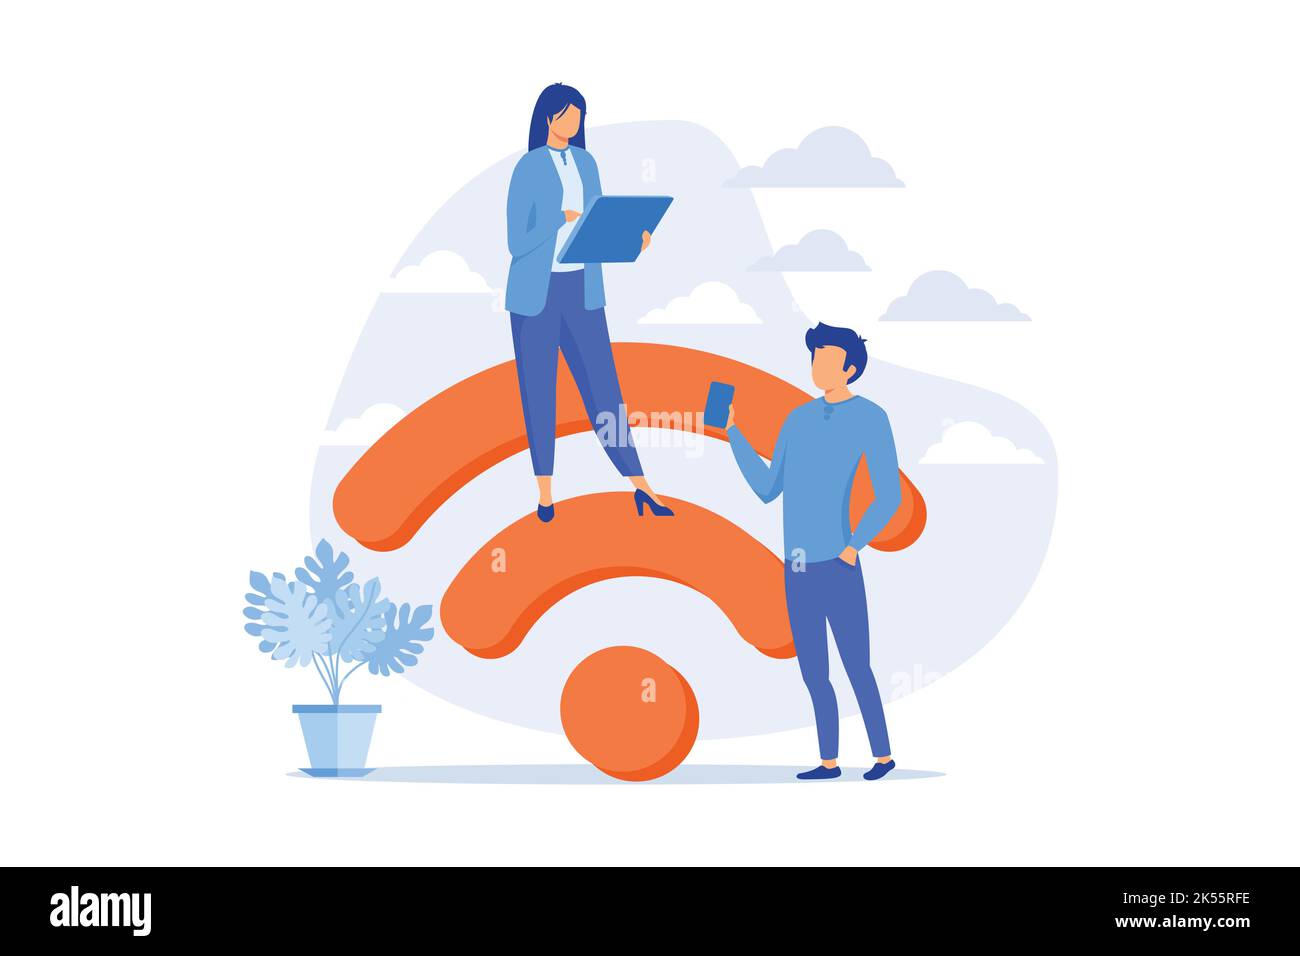 Public wi fi hotspot. Wireless technology, free signal zone, web connection. People surfing internet using portable gadgets, smartphone and laptop fla Stock Vector